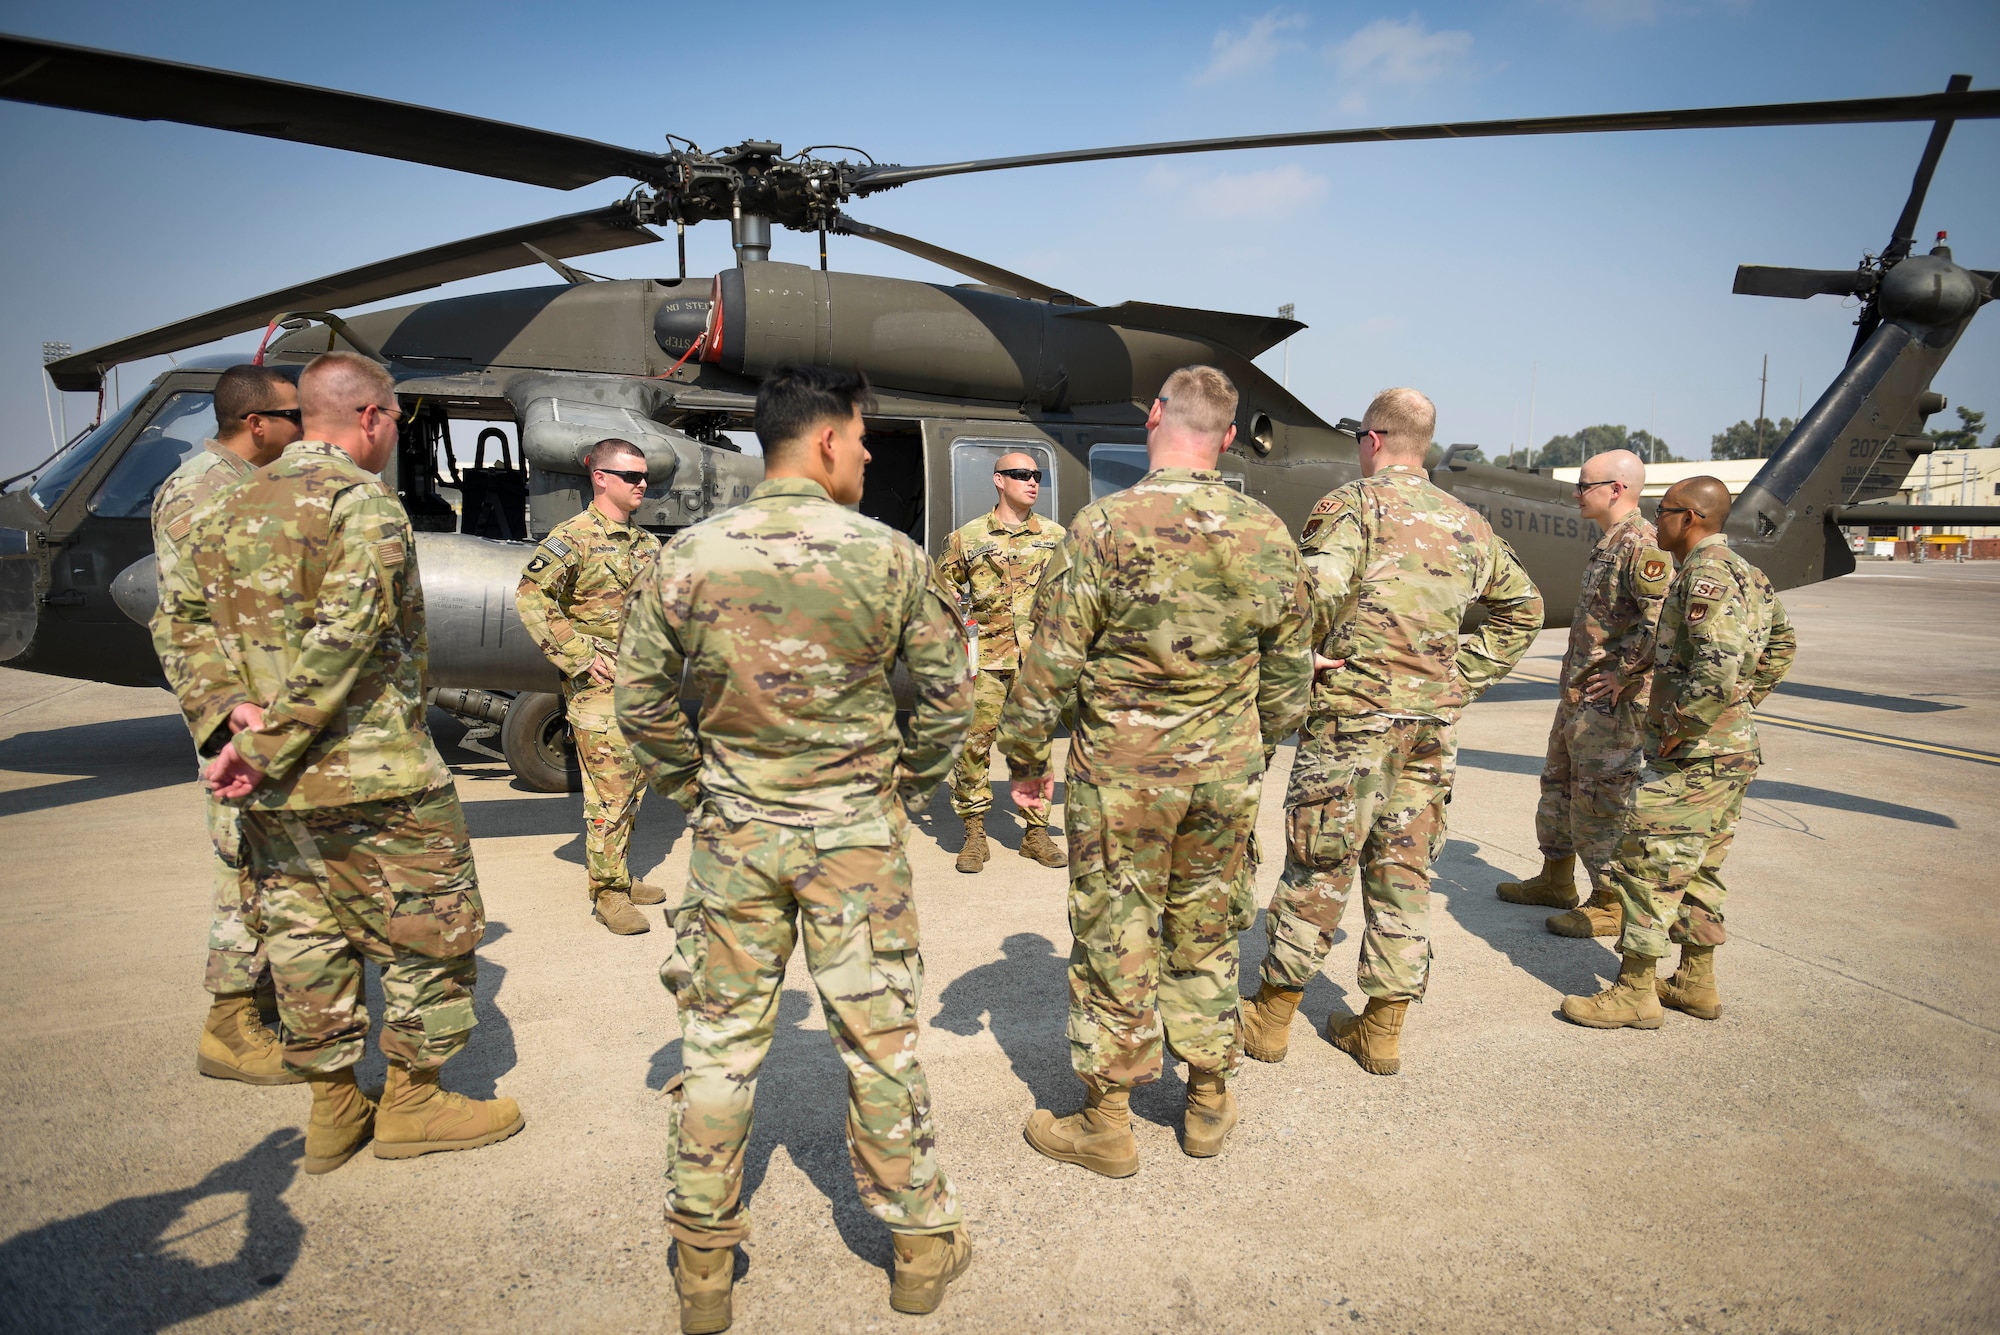 Airmen standing around a helicopter